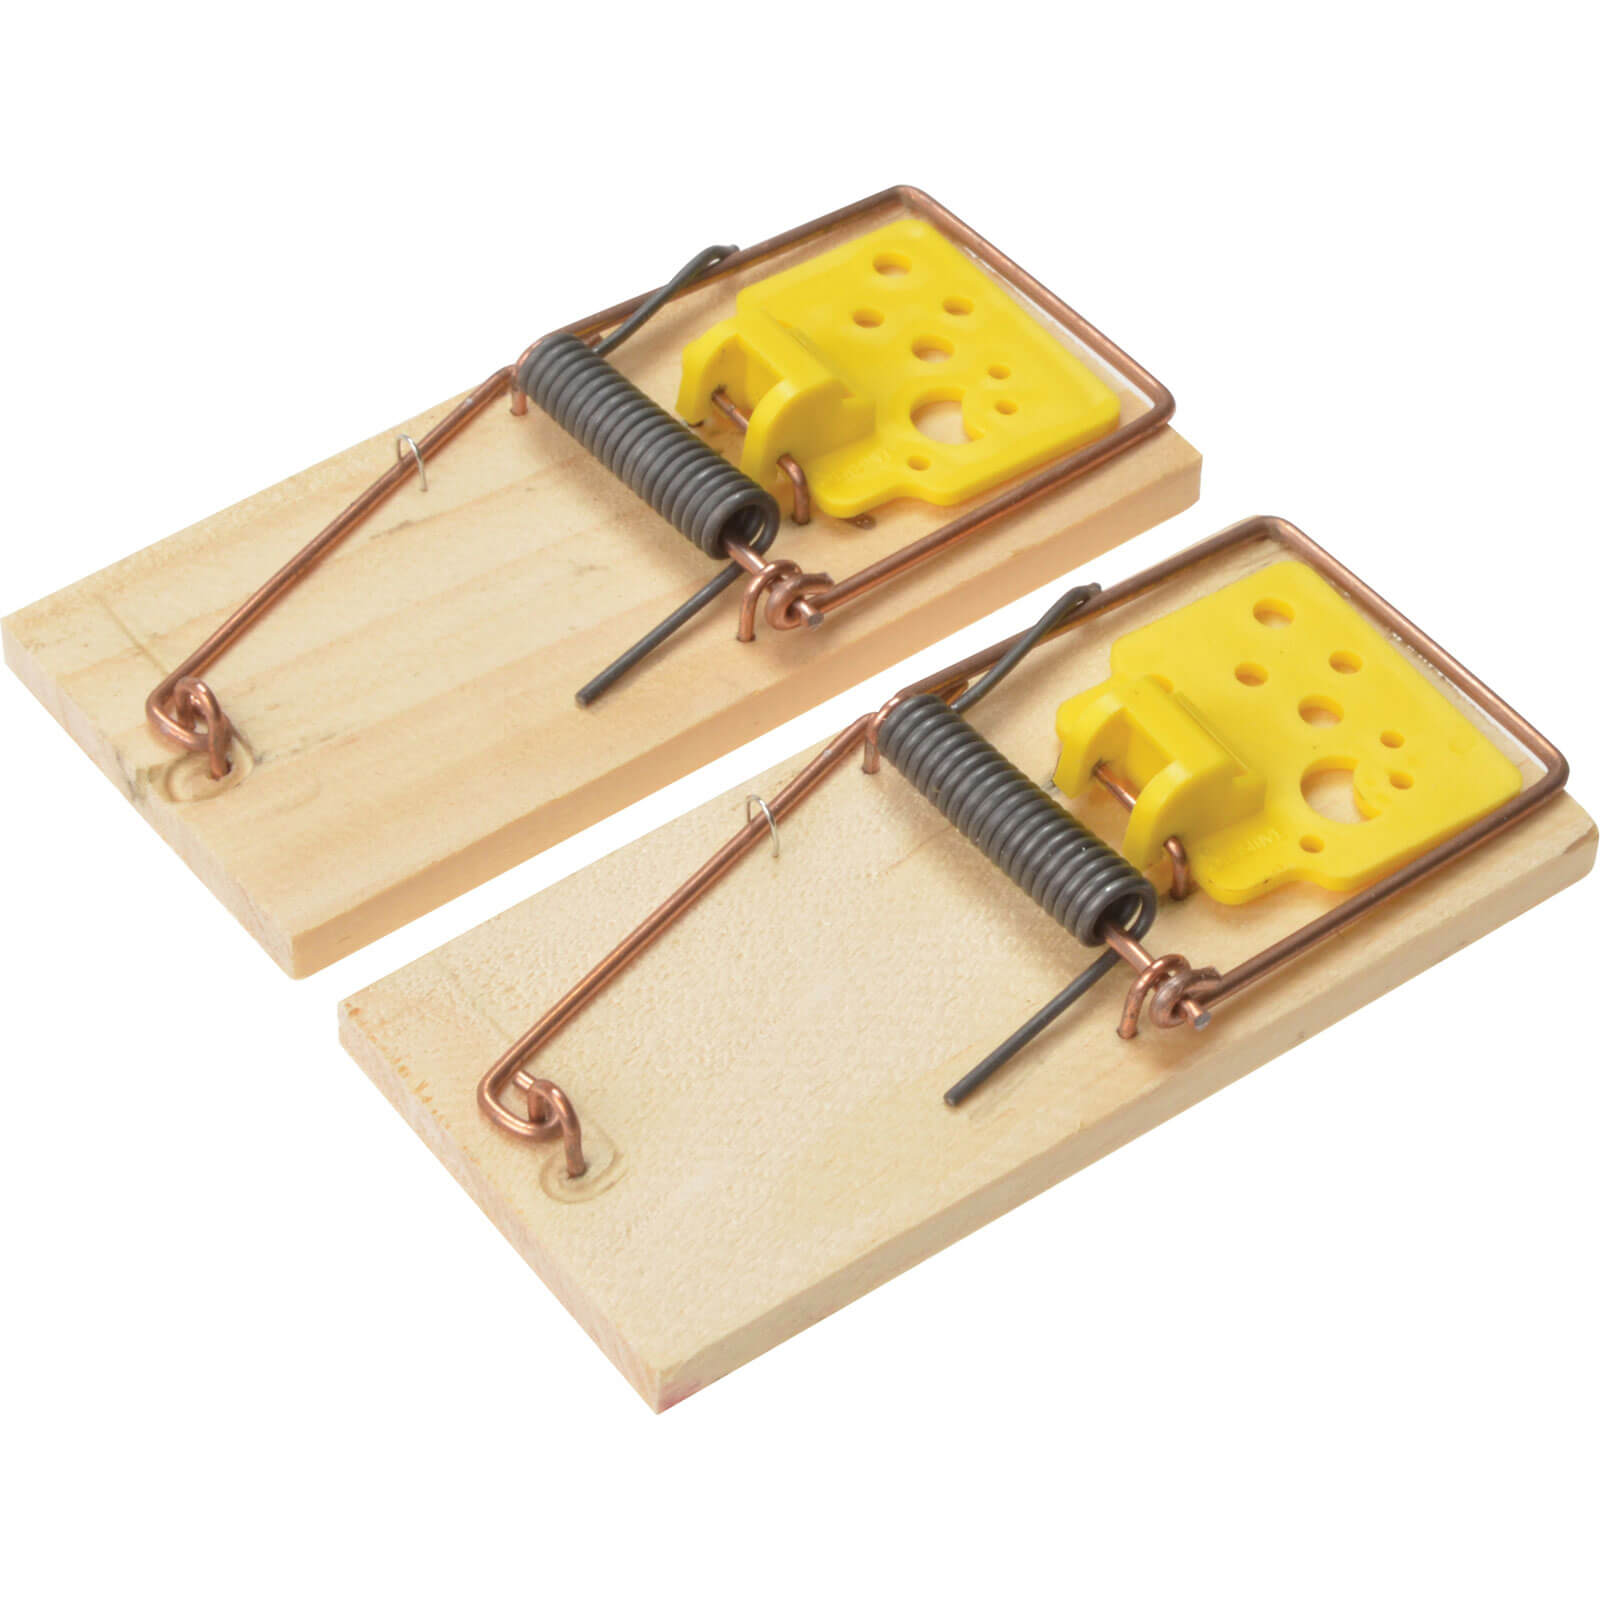 Rentokil Wooden Mouse Traps Pack of 2